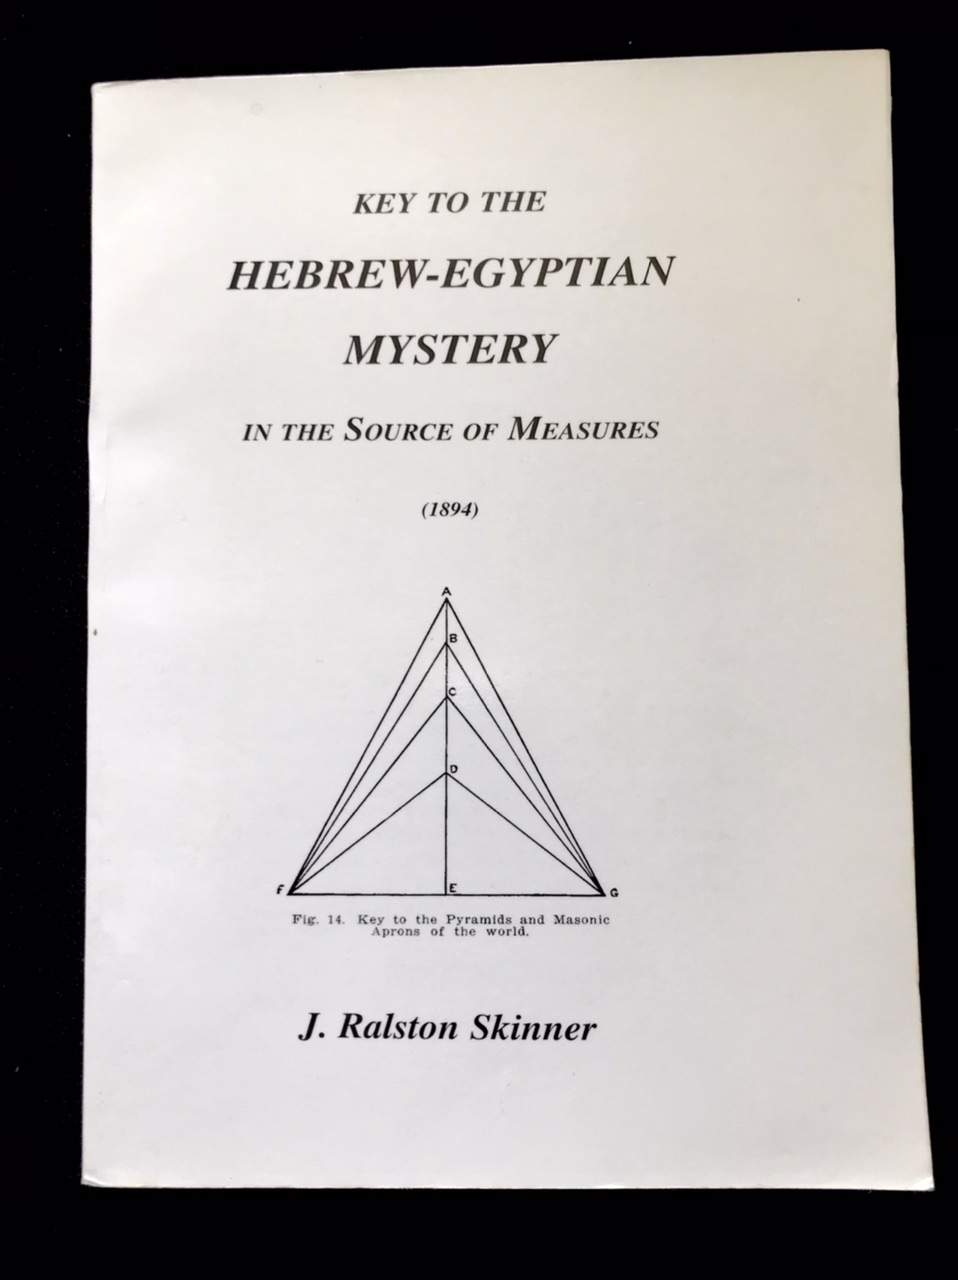 Key to the Hebrew-Egyptian Mystery in The Source of Measures by J. Ralston Skinner